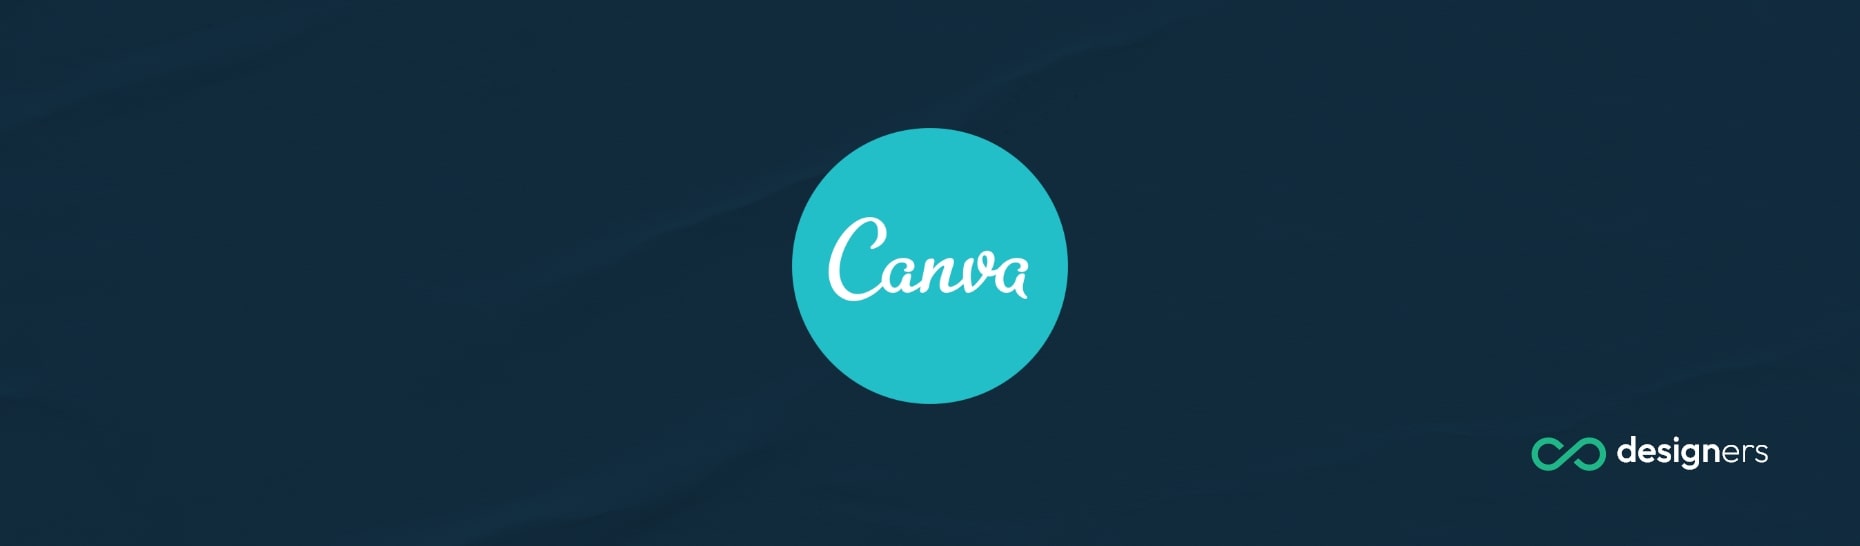 How Do I Identify Colors in Canva?